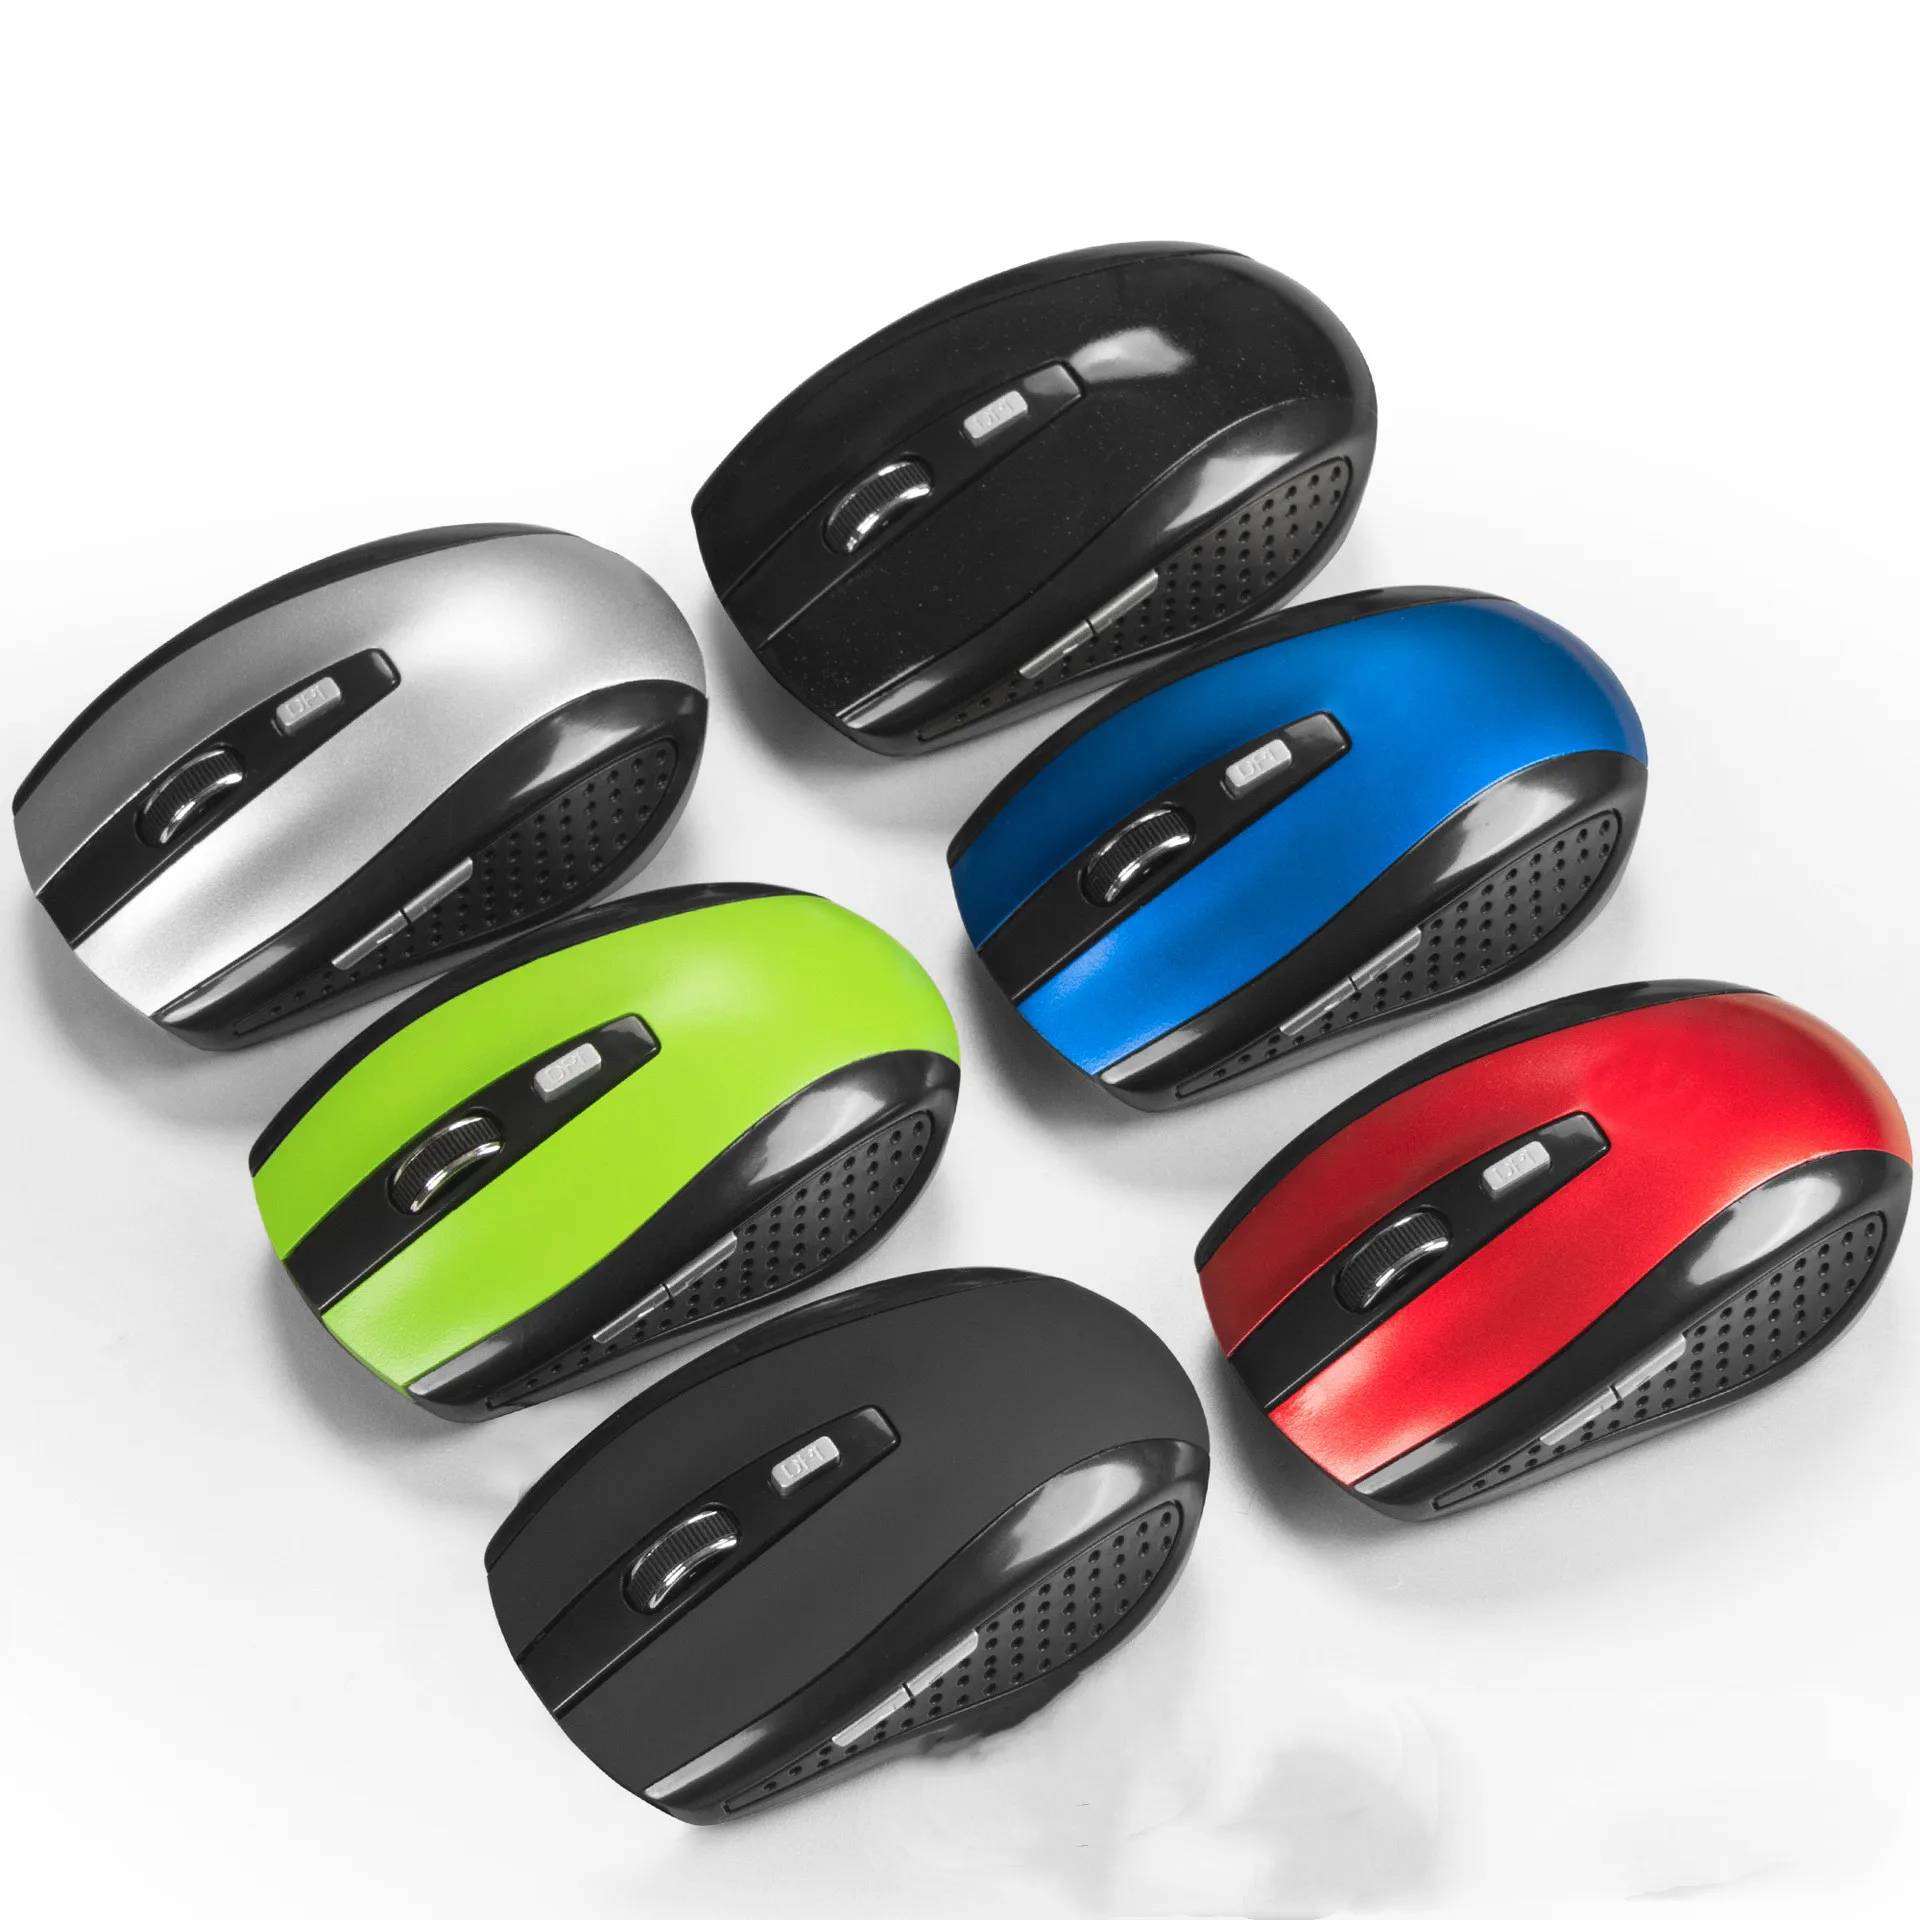 

2.4G Wireless Mouse with 4 Buttons-3 DPI Adjustable 800/1200/1600-Optical silent travelling mouse for PC / Laptop / Mac